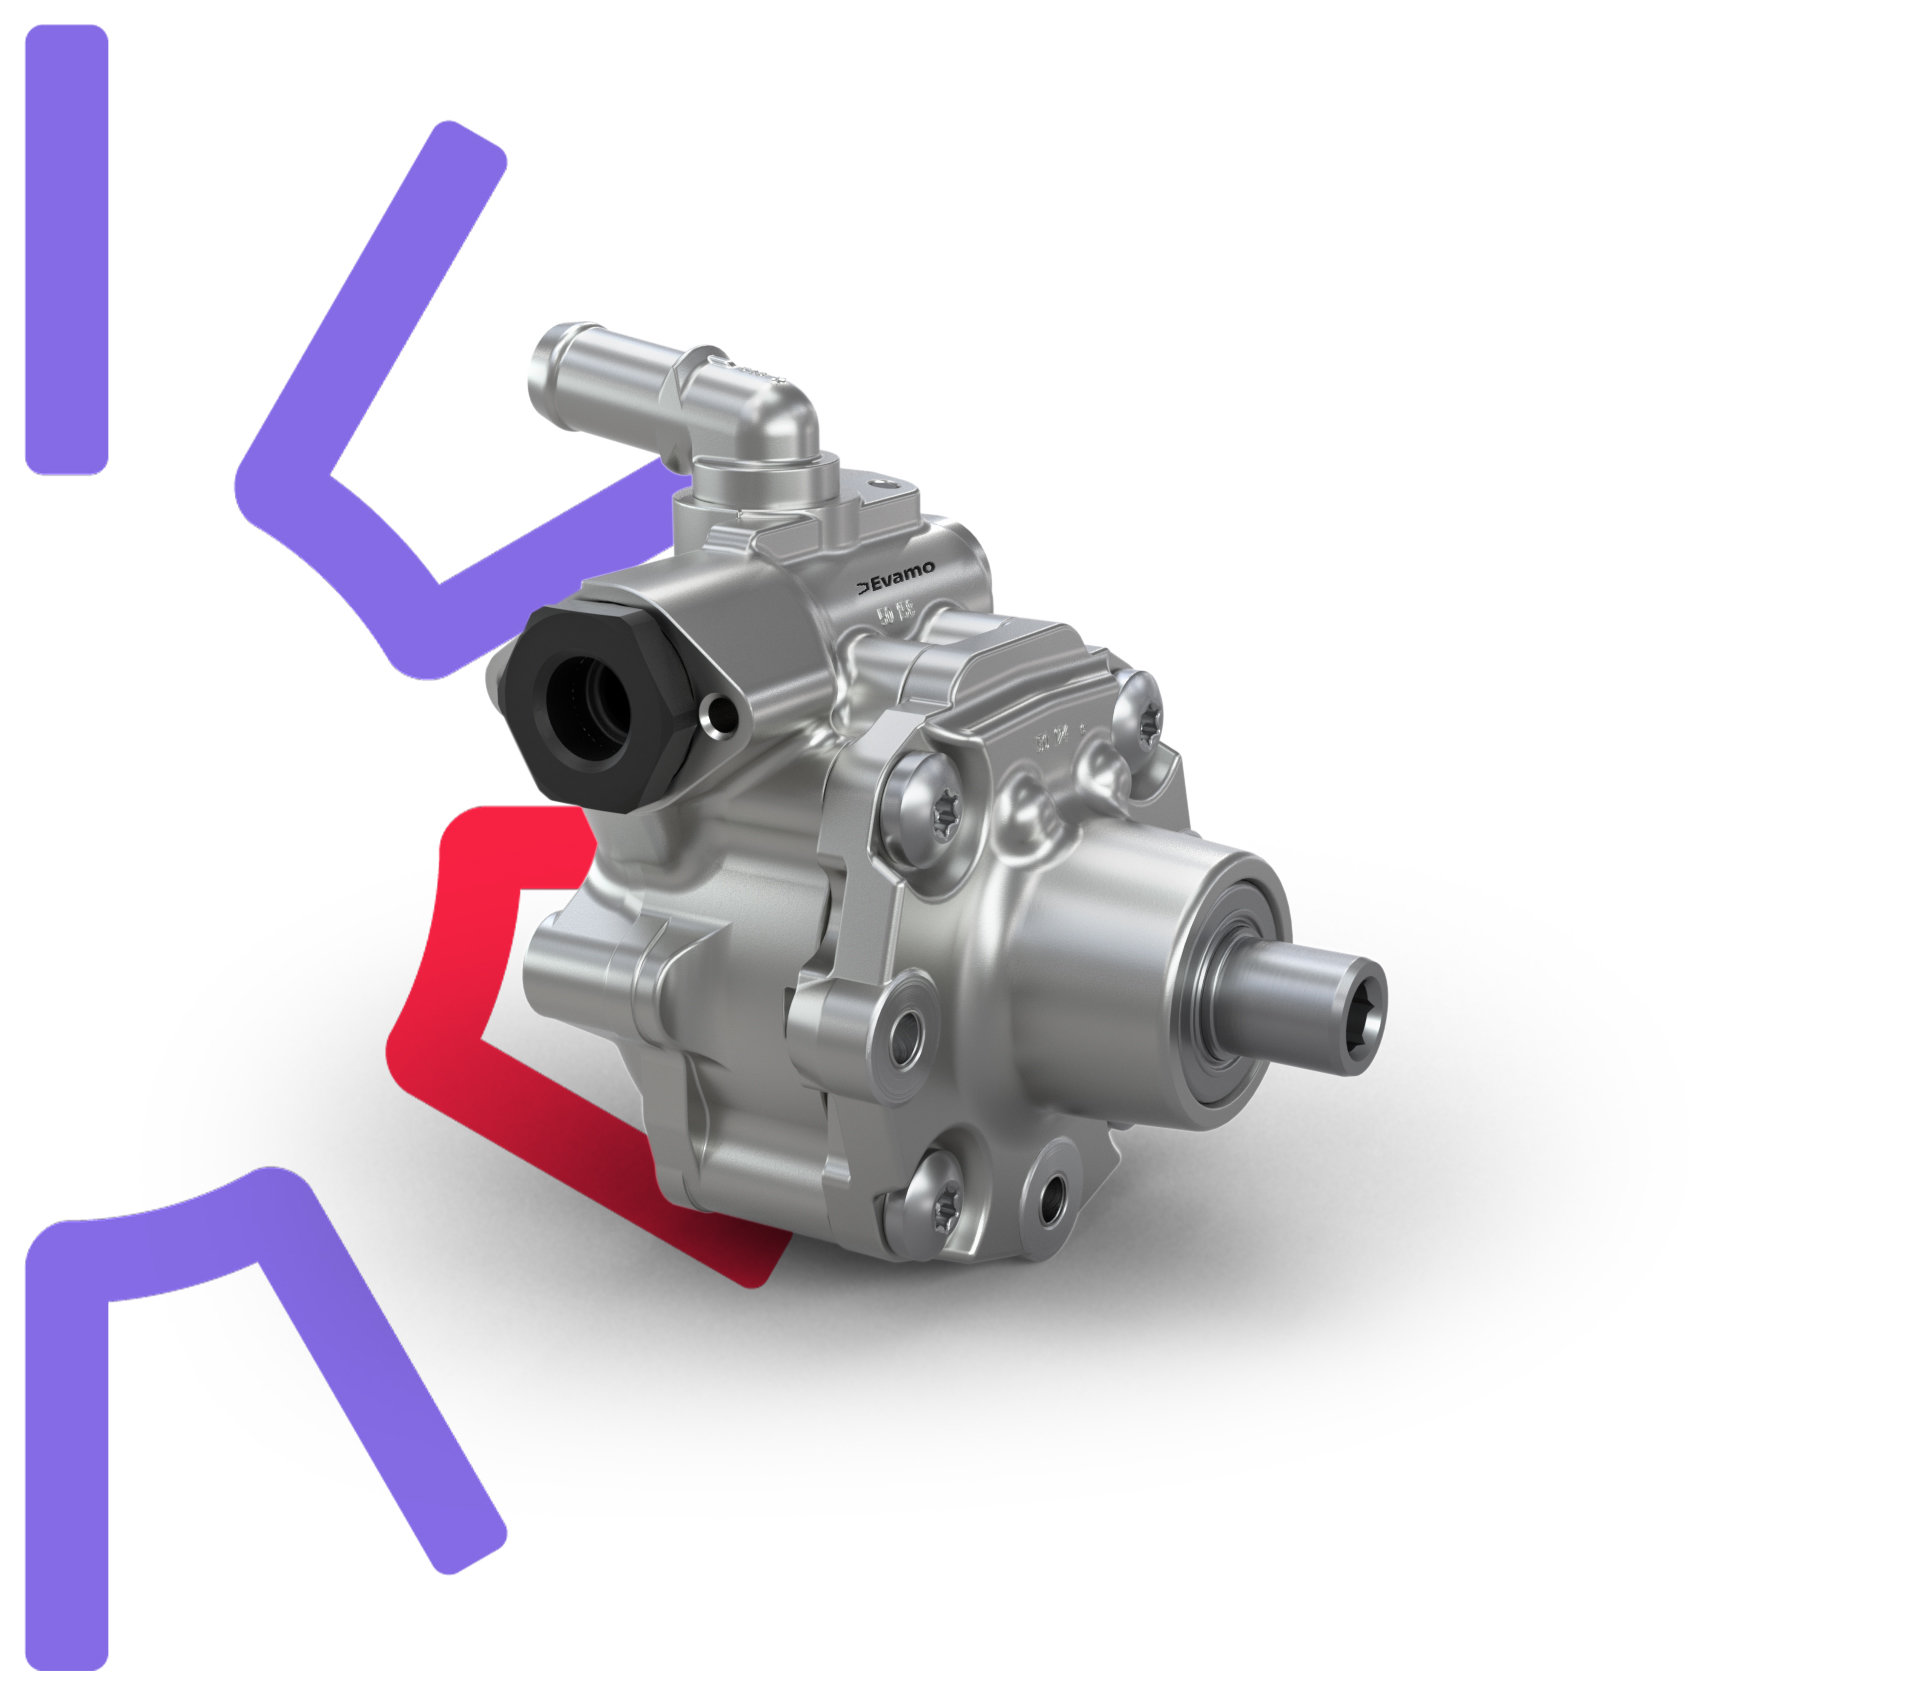 The front view of the Varioserv power steering pump for passenger cars shows the innovative design and the pump housing.